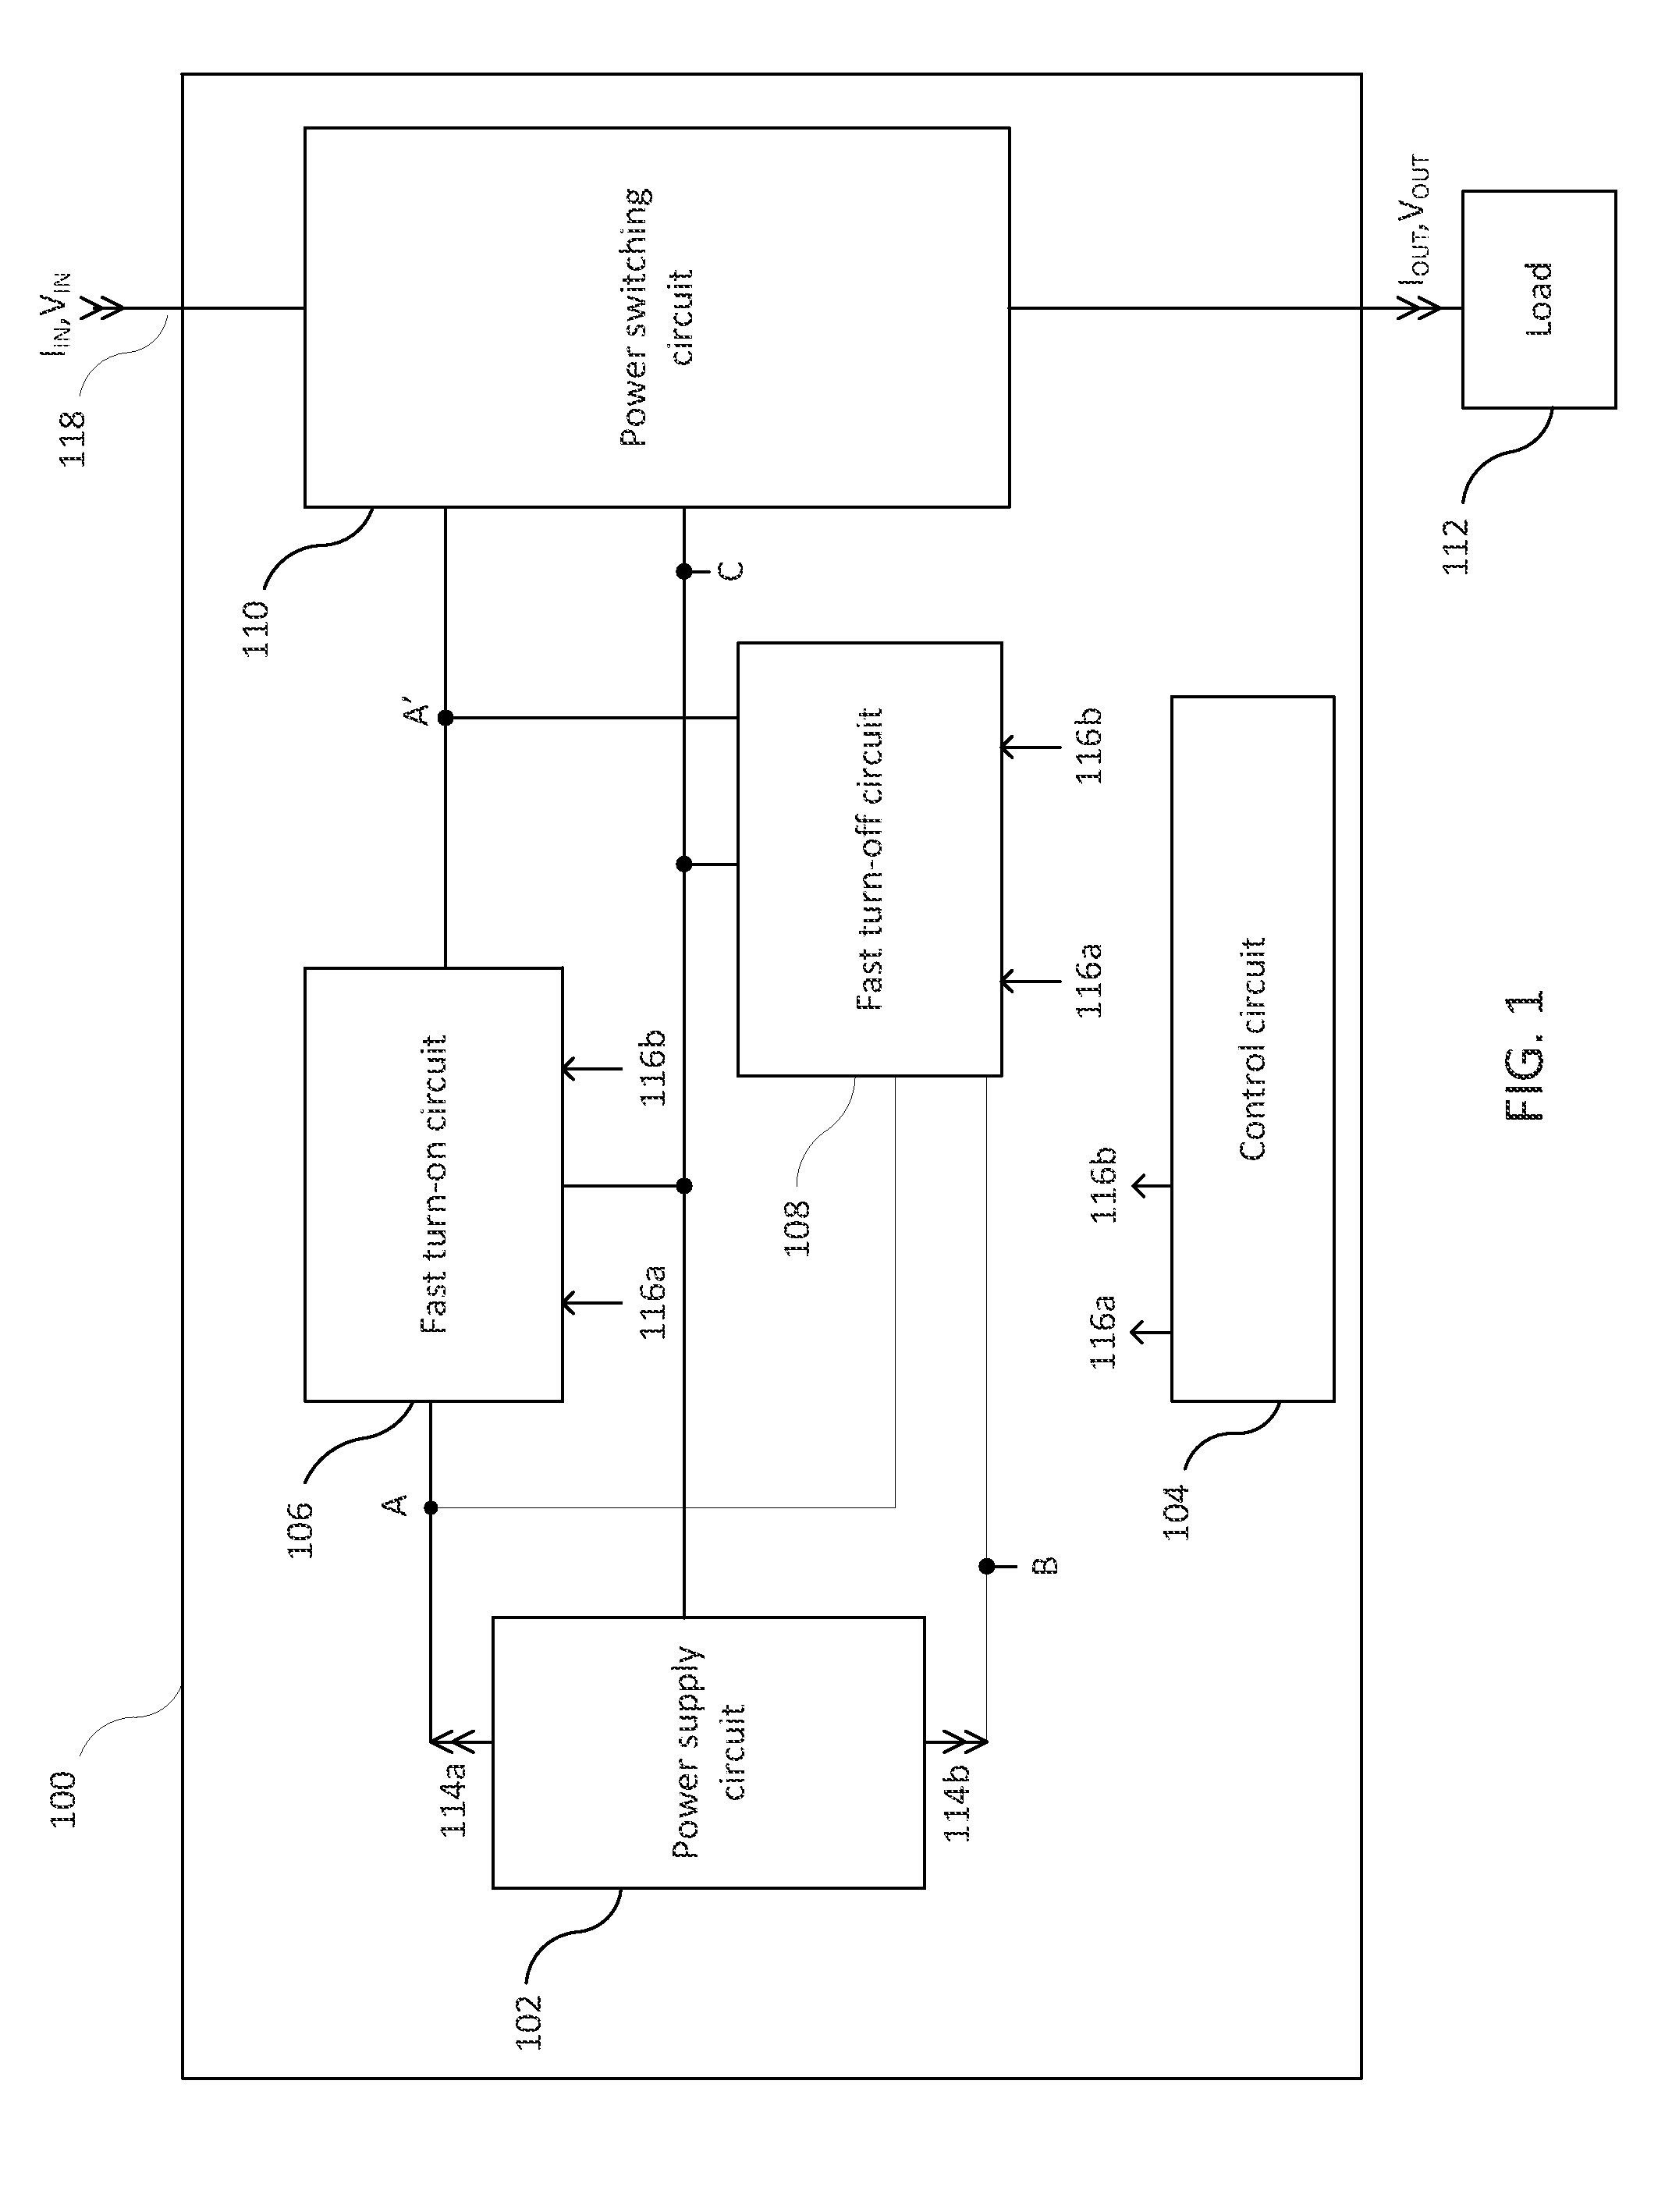 Solid state relay circuit